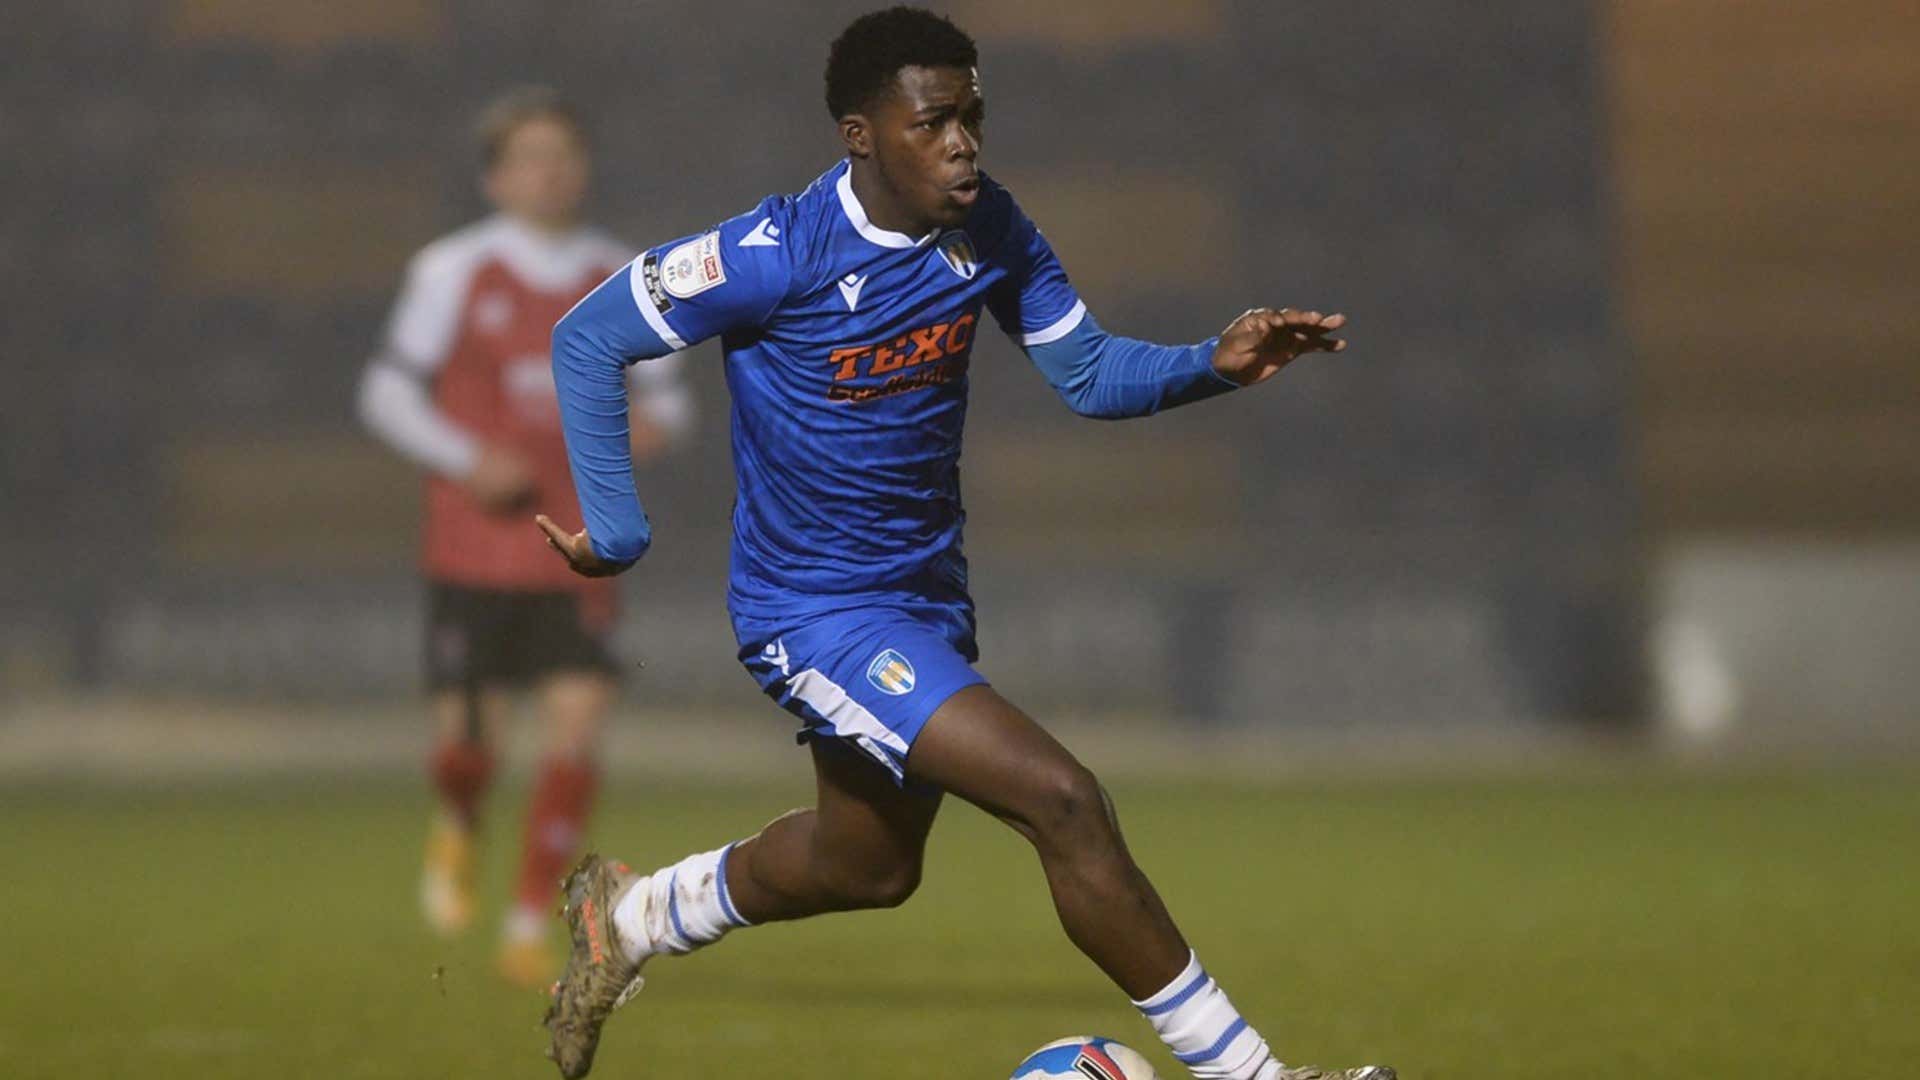 Colchester United sign Kwame Poku.